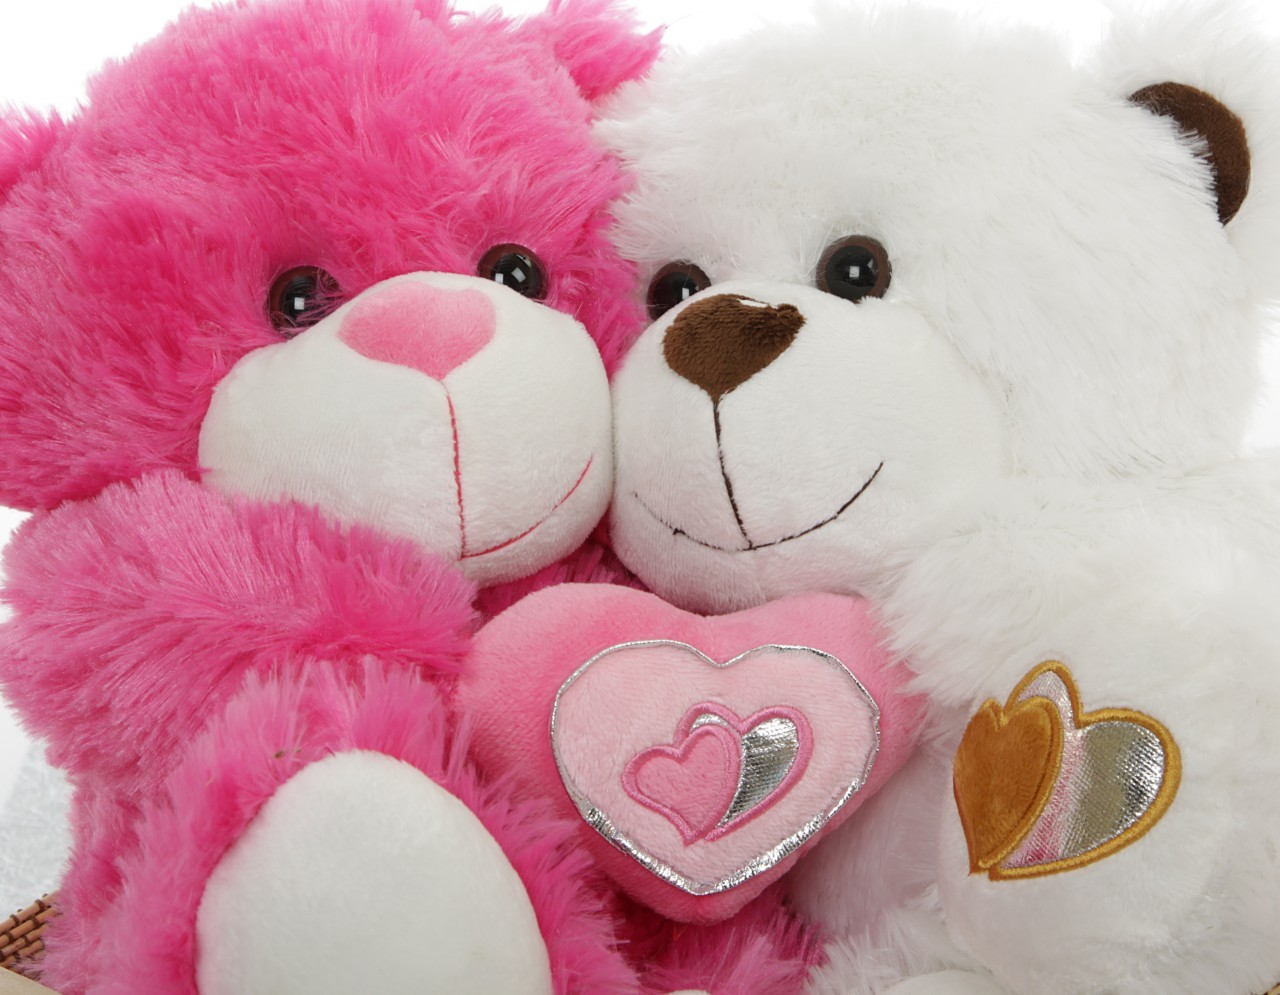 Free download download love teddy bear wallpaper which is under ...